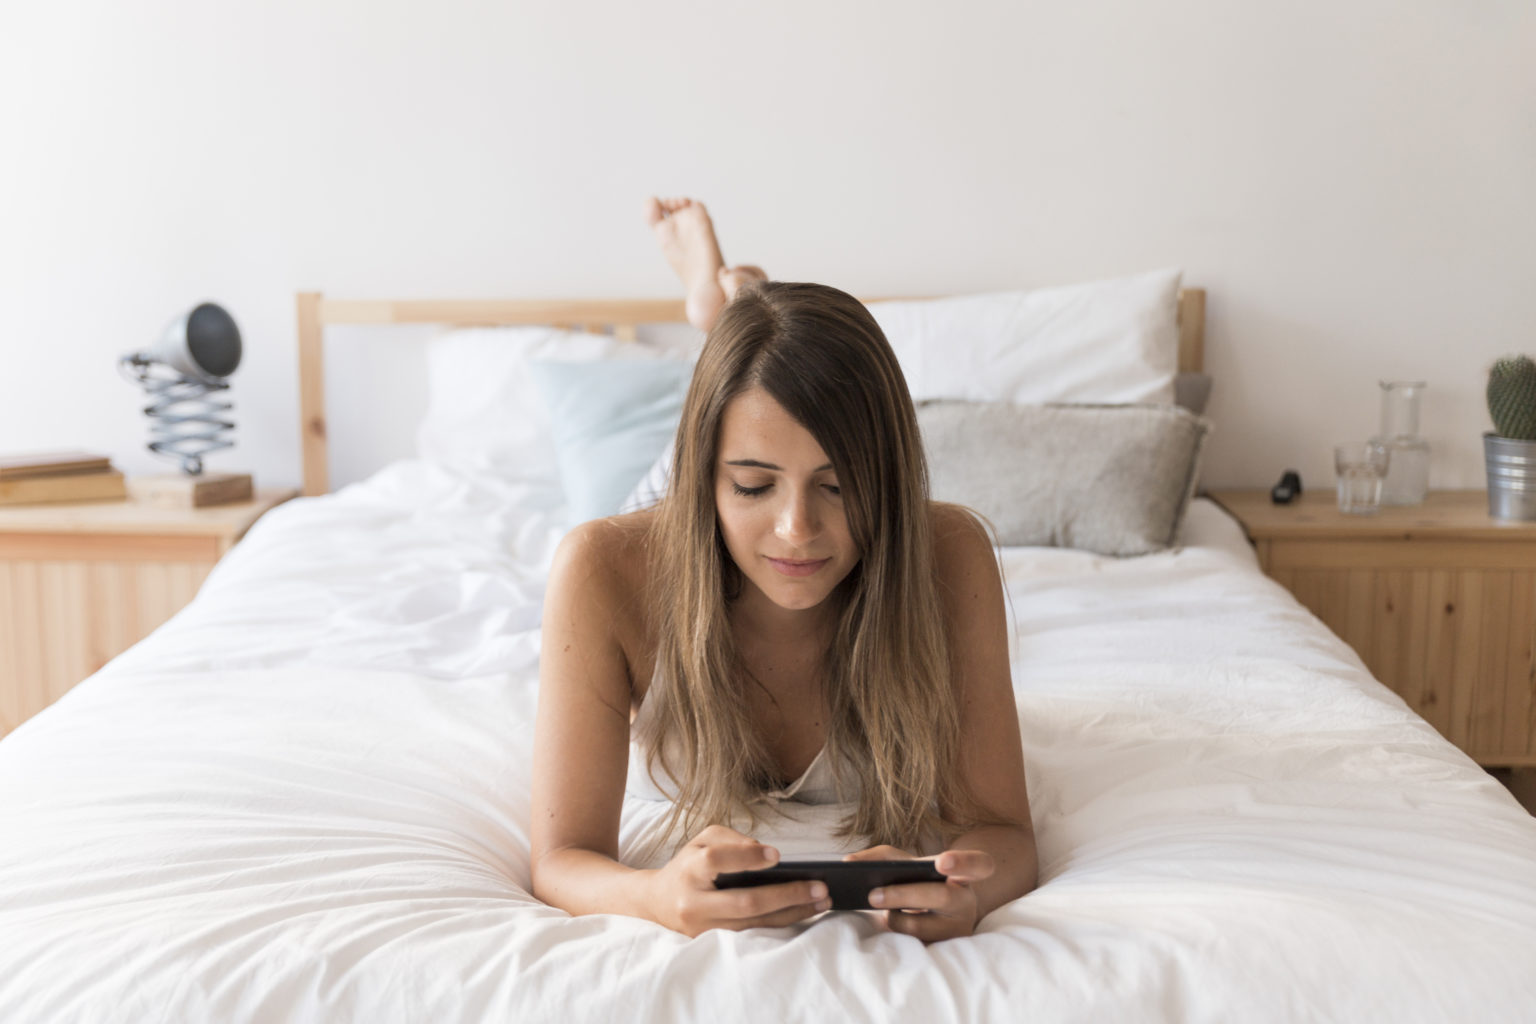 Girl on bed with phone watching porn to discover fantasies